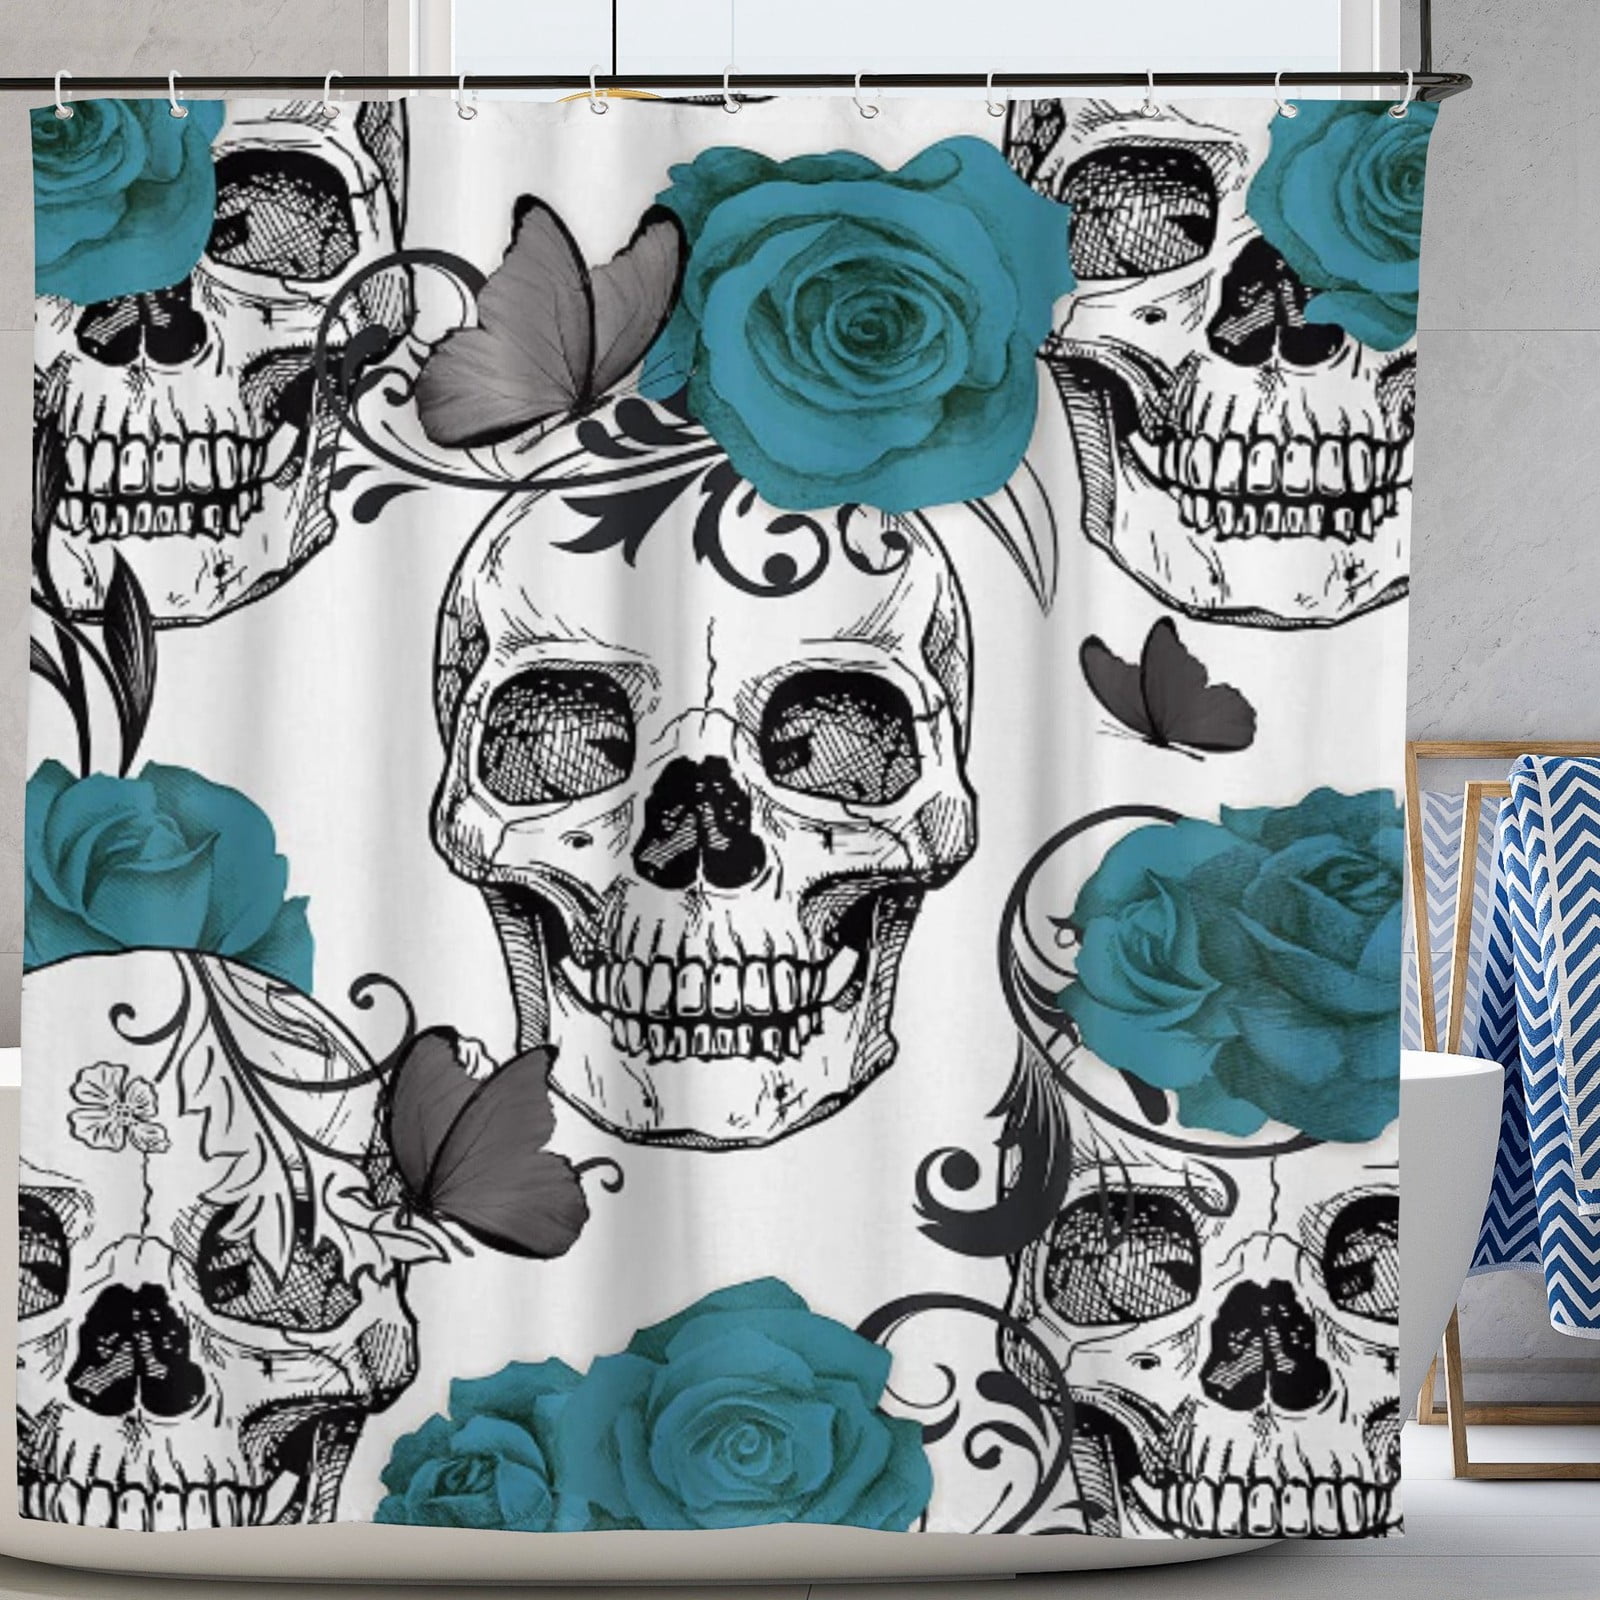 Details about   Halloween Spooky Skull Ghost Black White Waterproof Fabric Shower Curtain Set 